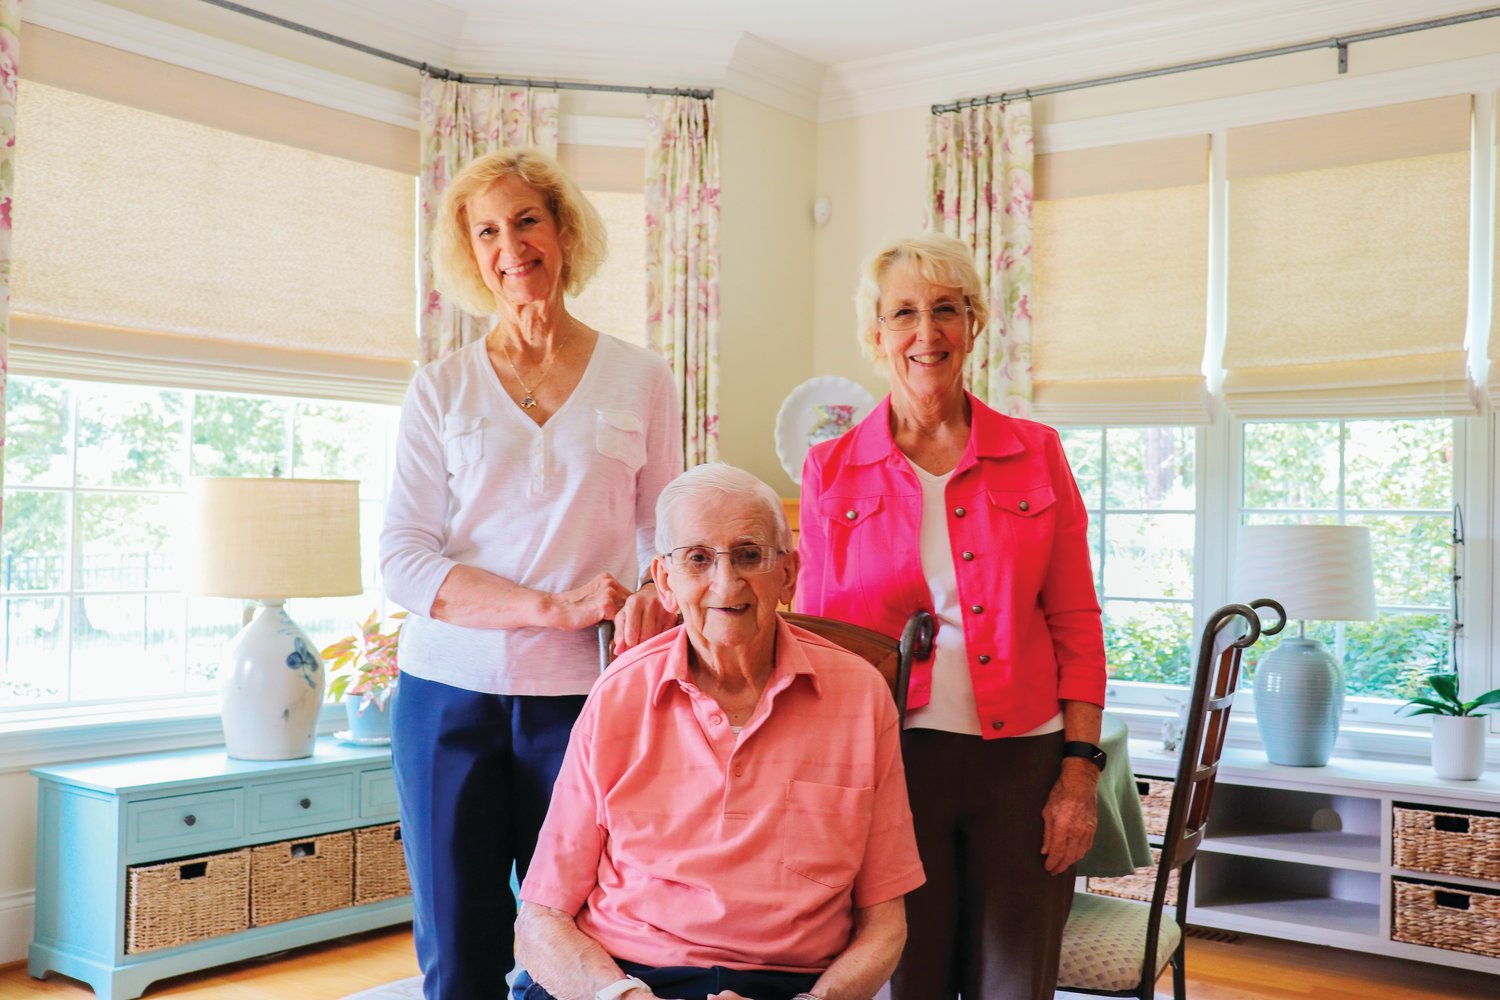 World War II veteran Wesley Hart, who's 102 years old, poses with his daughters Lynne Dyer (left) and Kathy Wakeman at the home he shares with Kathy in Chapel Ridge. Hart will be awarded the French Legion of Honor in a ceremony on Aug. 12.